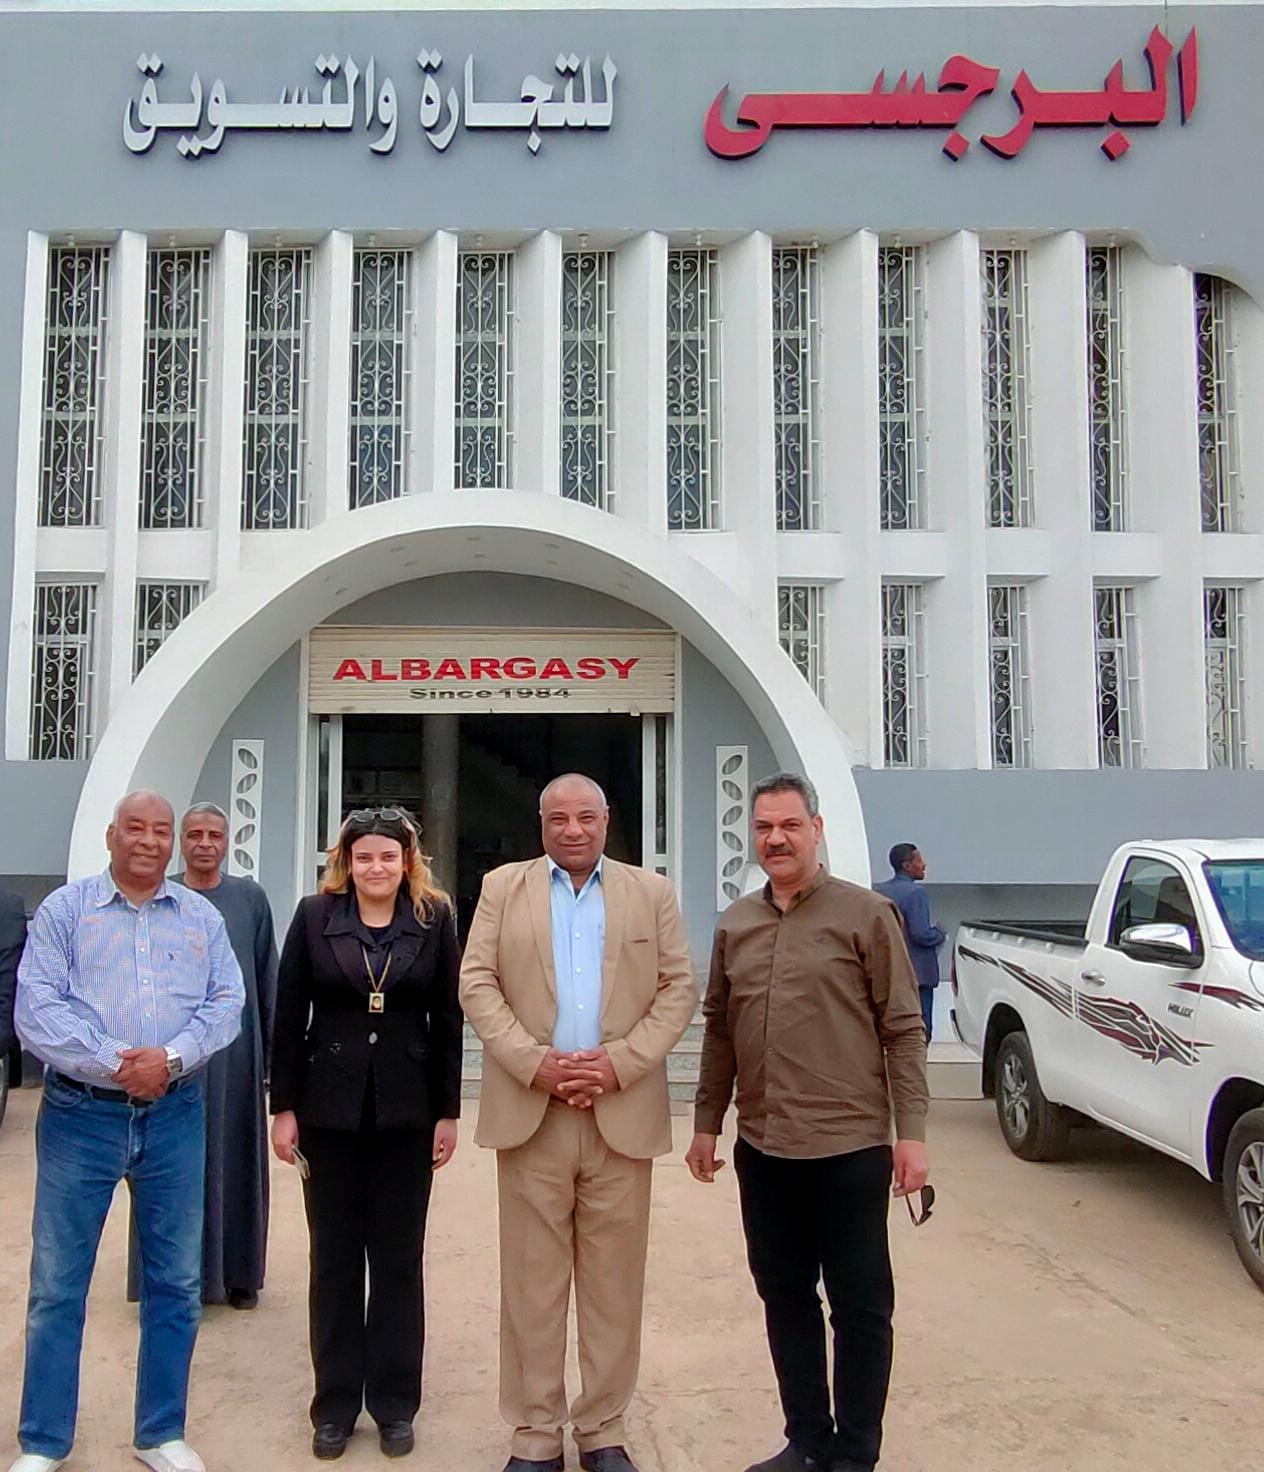 A visit by a high-level delegation from active entities in Aswan community